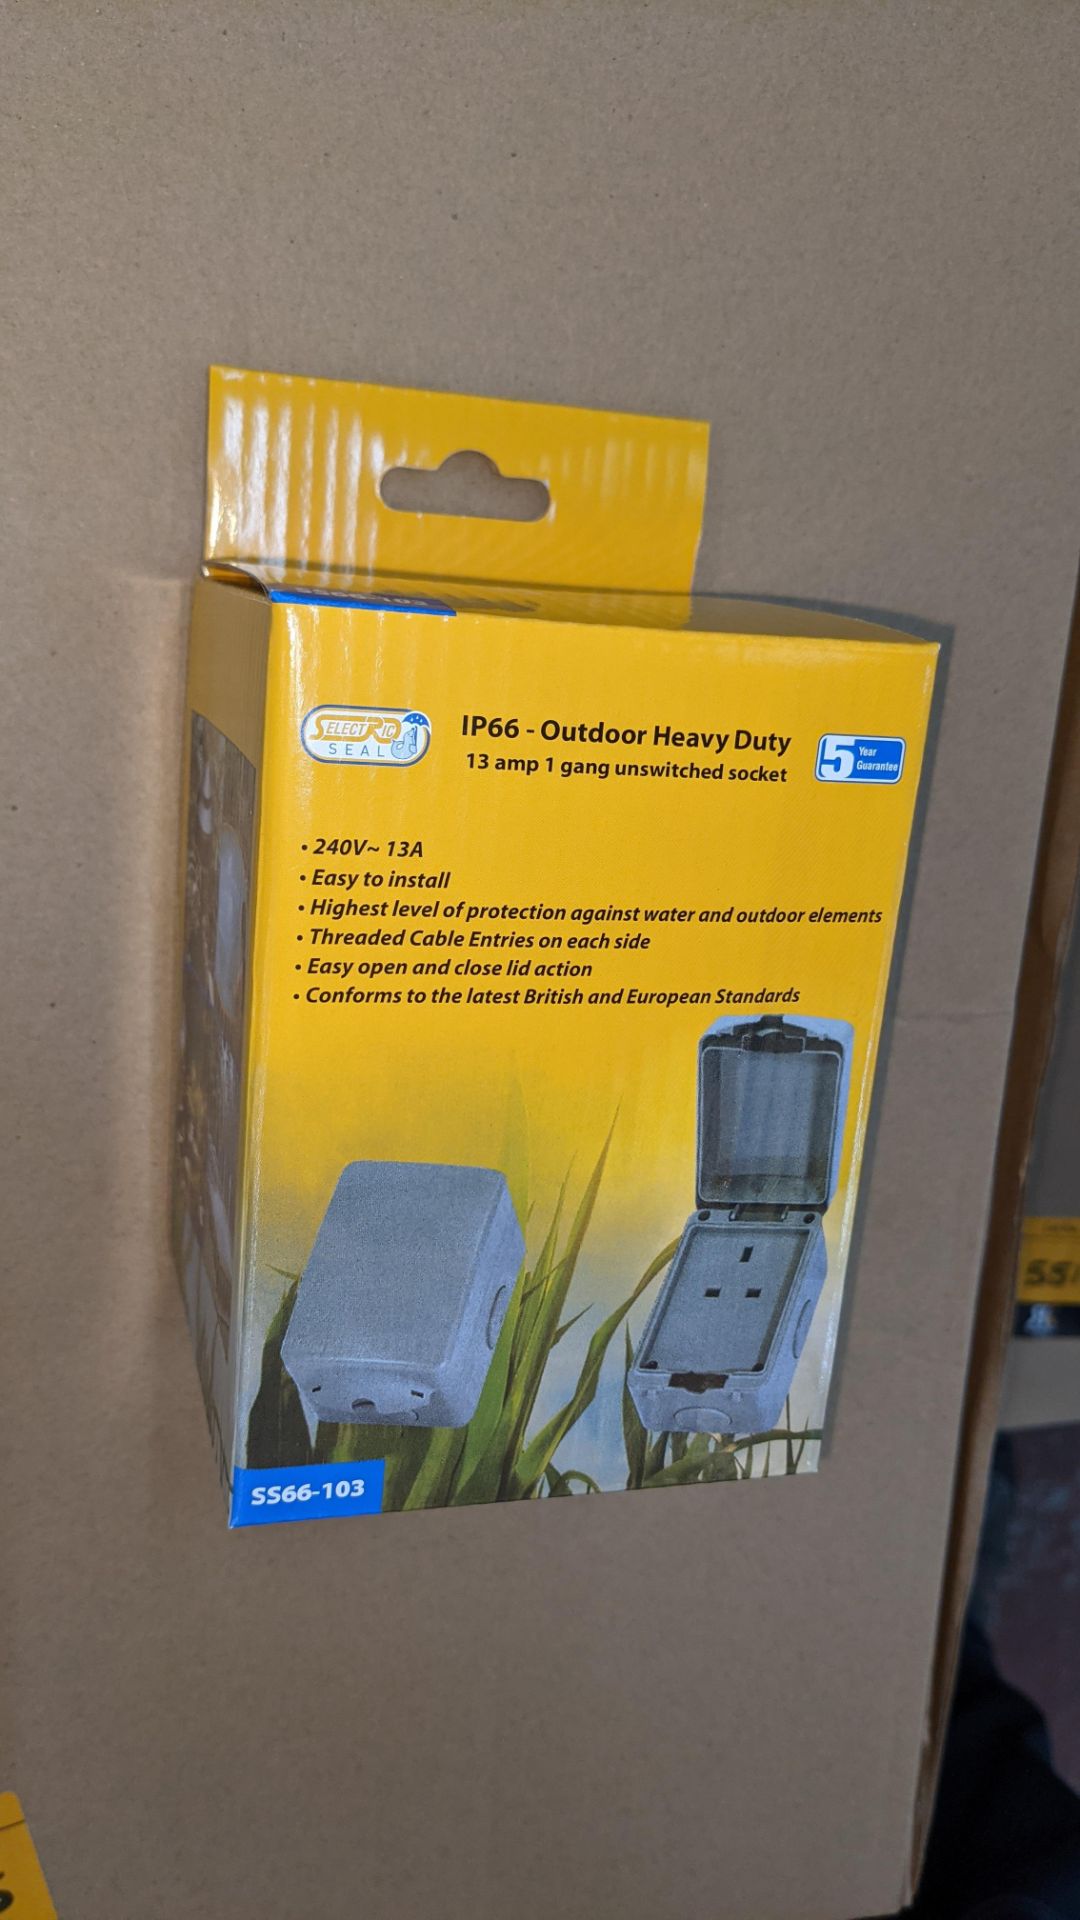 10 off IP66 outdoor heavy duty 13 amp 1 gang unswitched sockets - Image 5 of 5